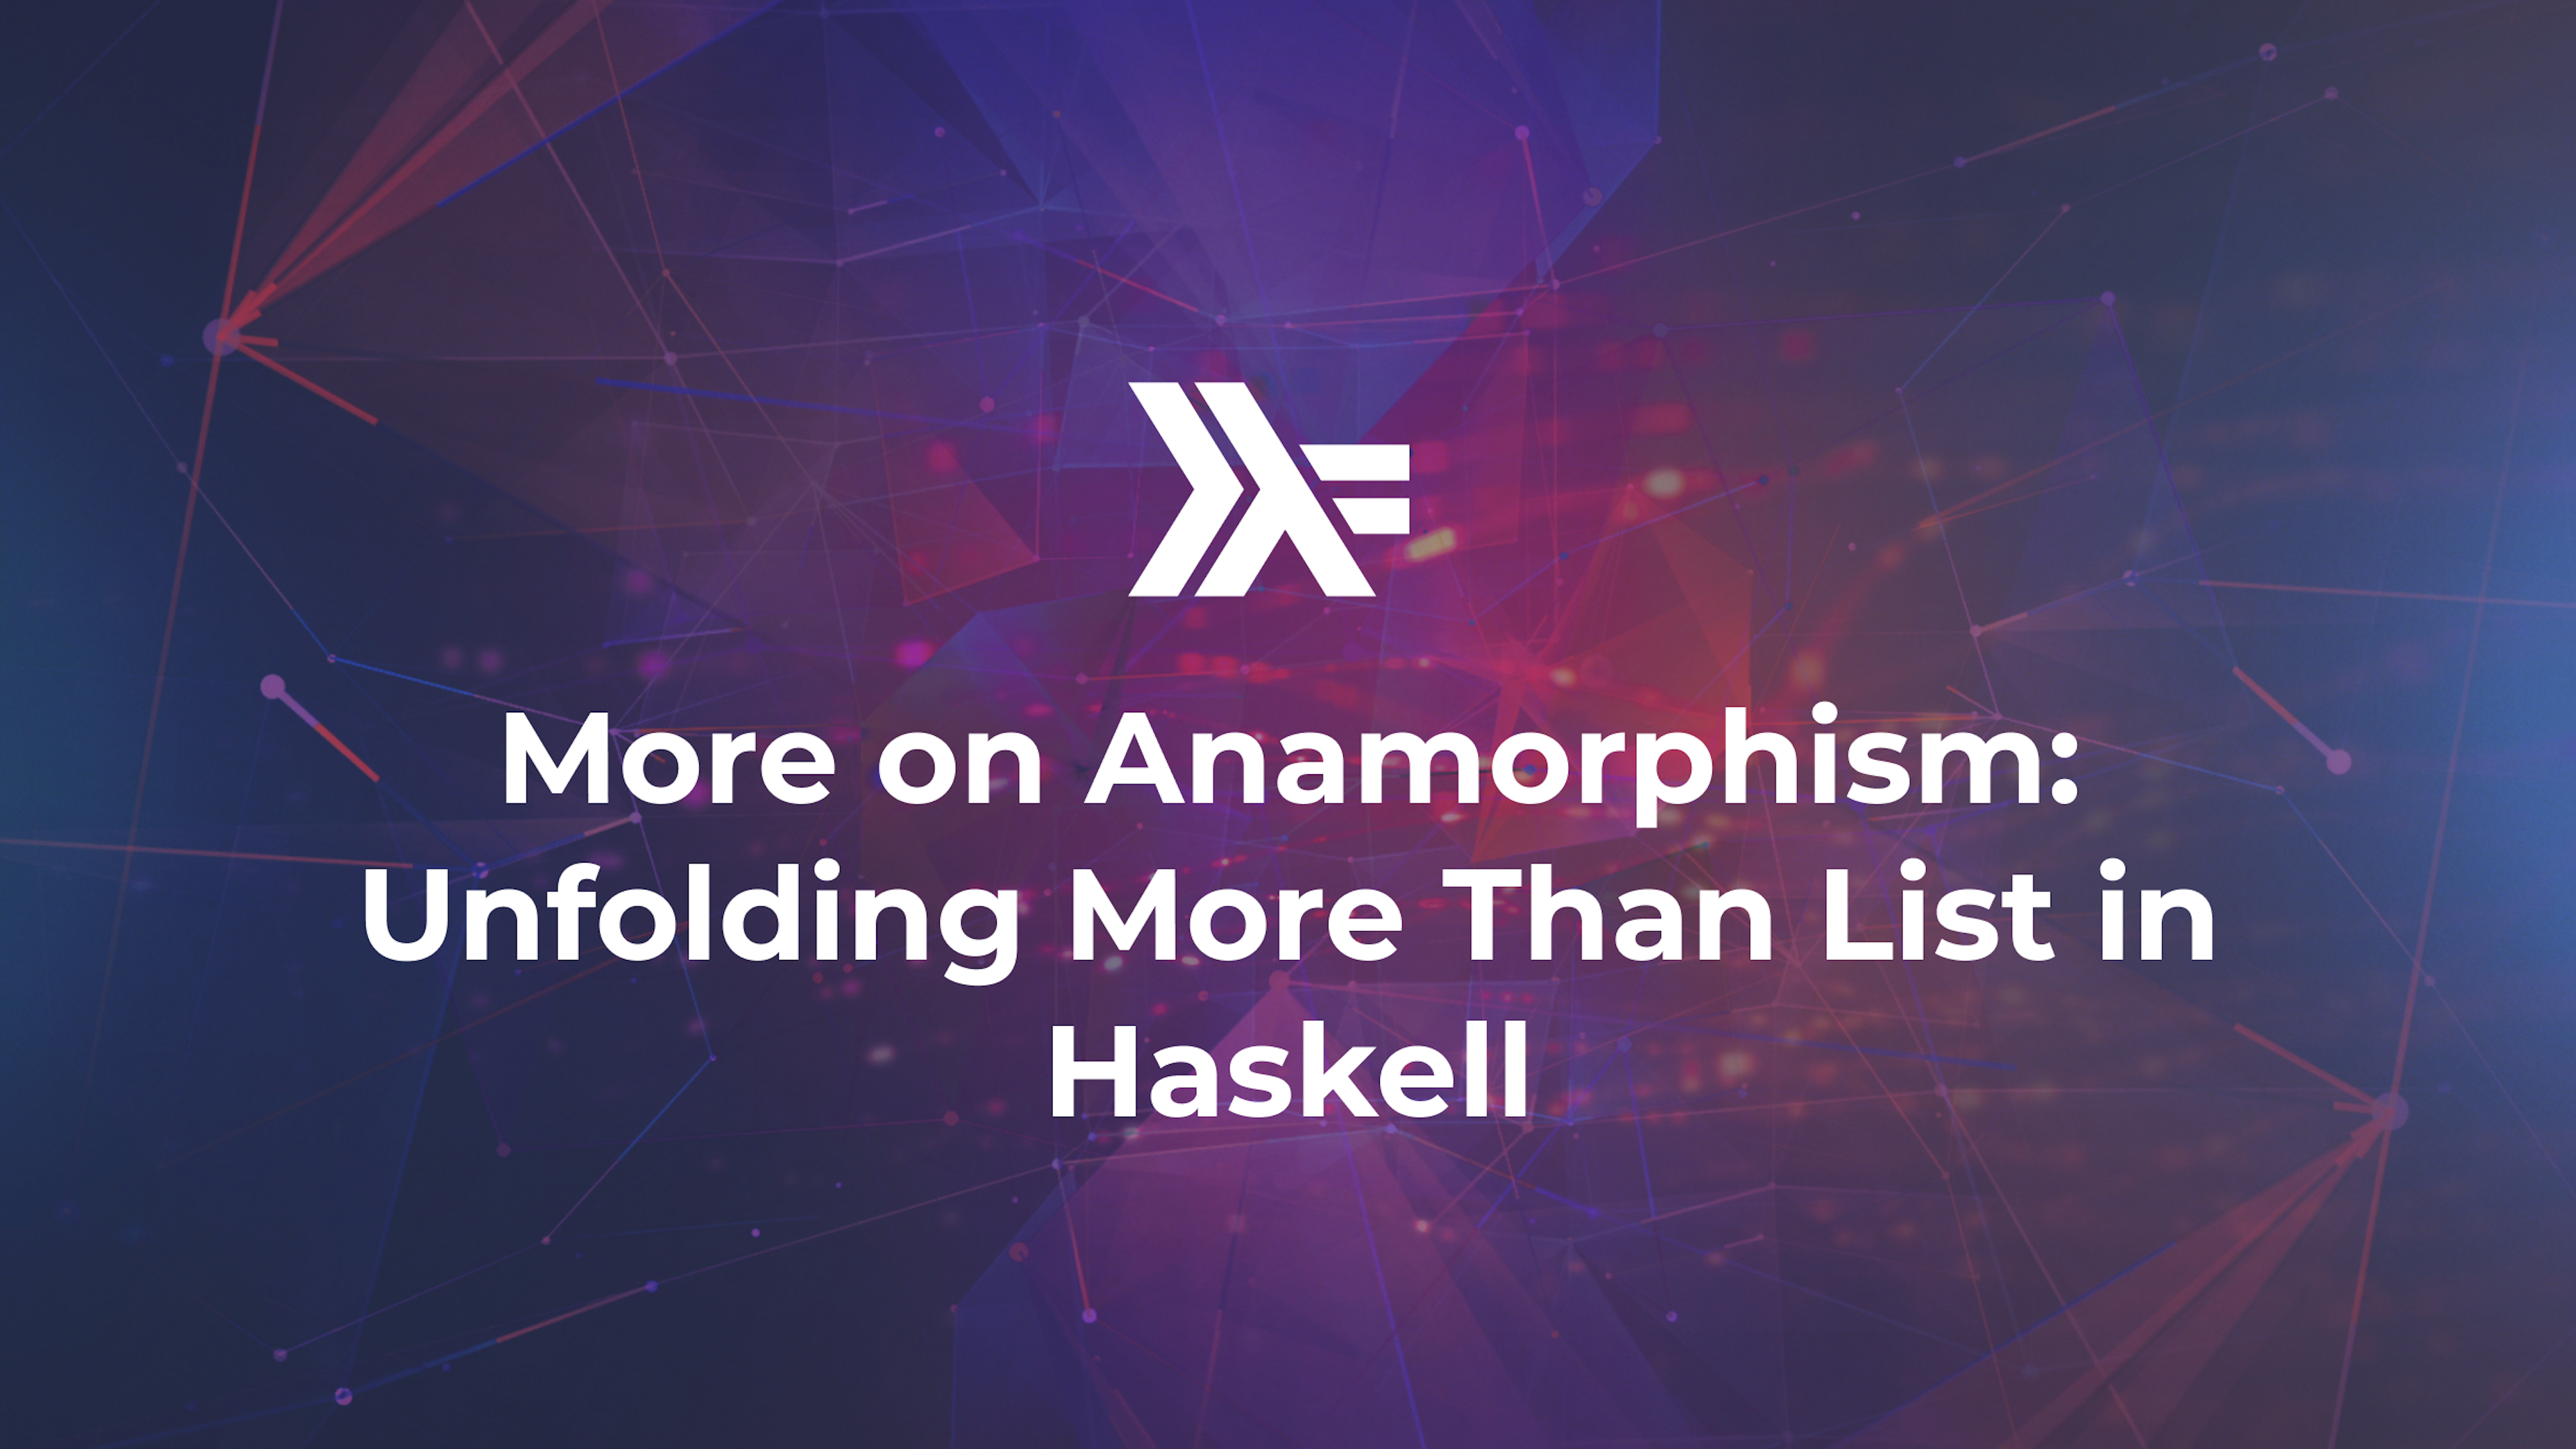 More on Anamorphism: Unfolding More Than List in Haskell